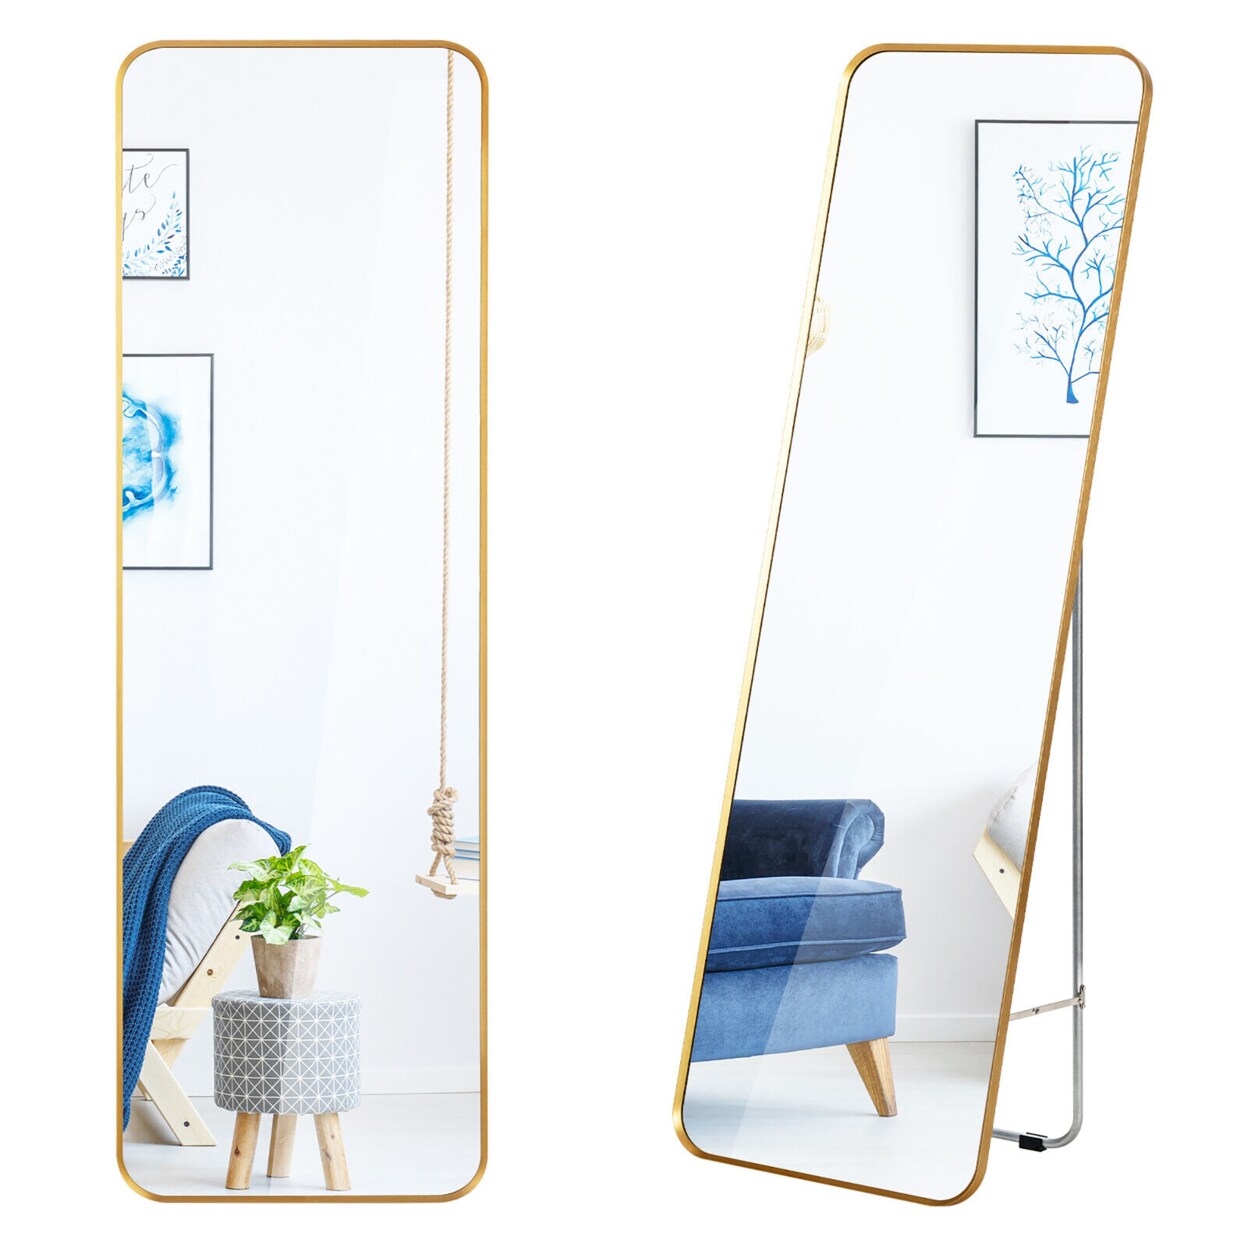 Gymax Full Length Wall Mounted Hanging Mirror with Stand Free Standing Body Mirror